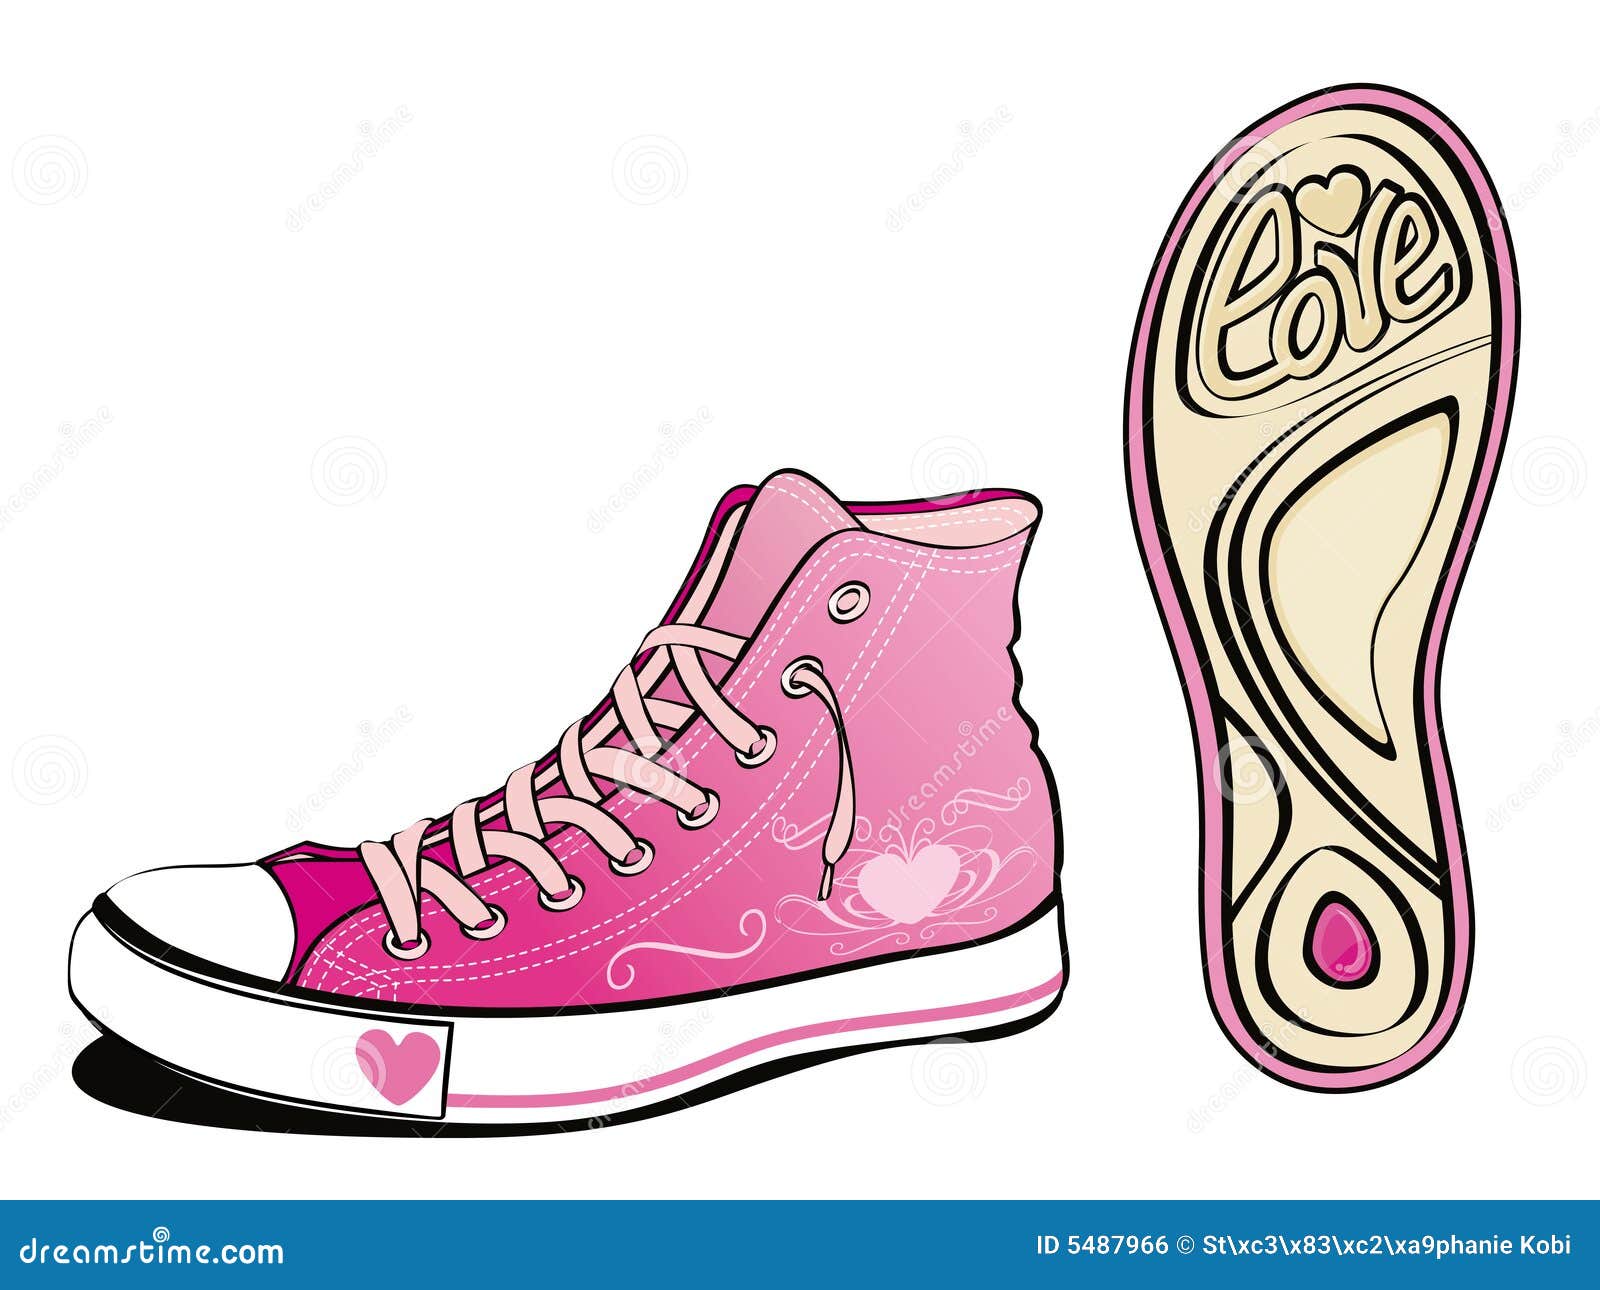 Love shoe stock vector. Illustration of lace, white, graphic - 5487966